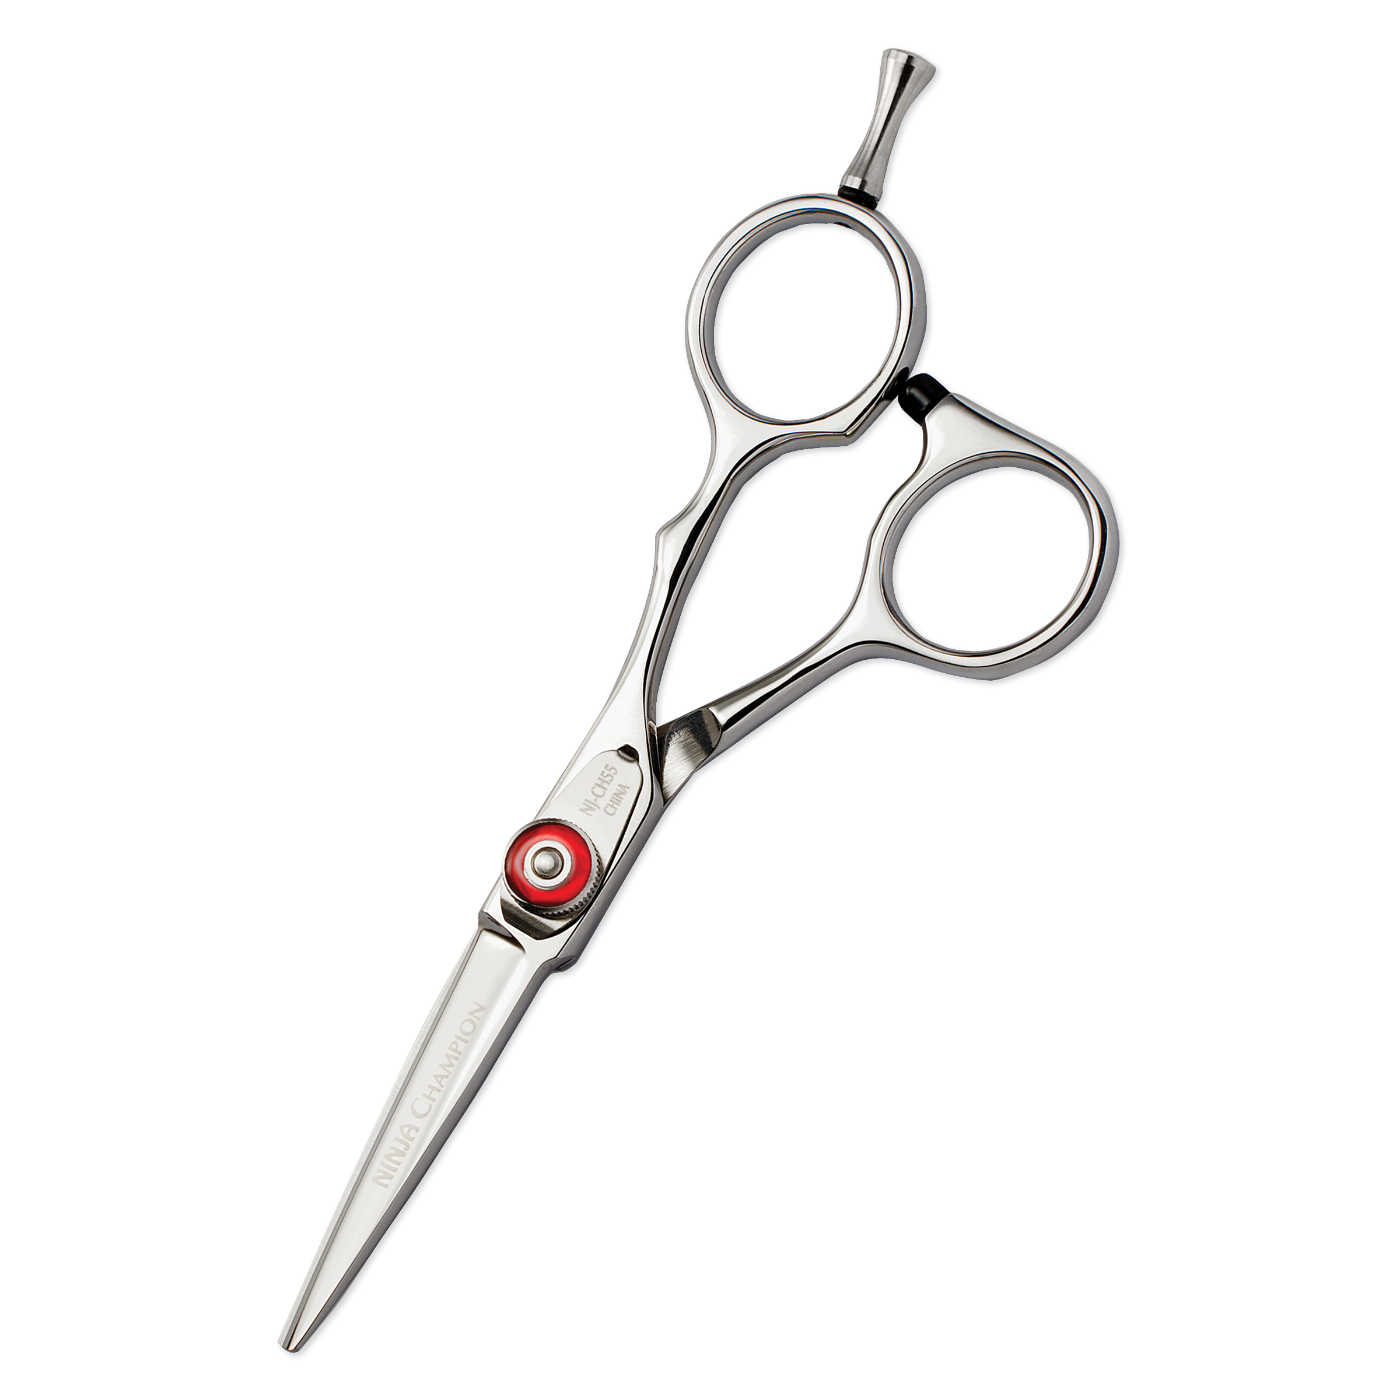 5-1/2" Champion Shear with Removable Finger-Rest